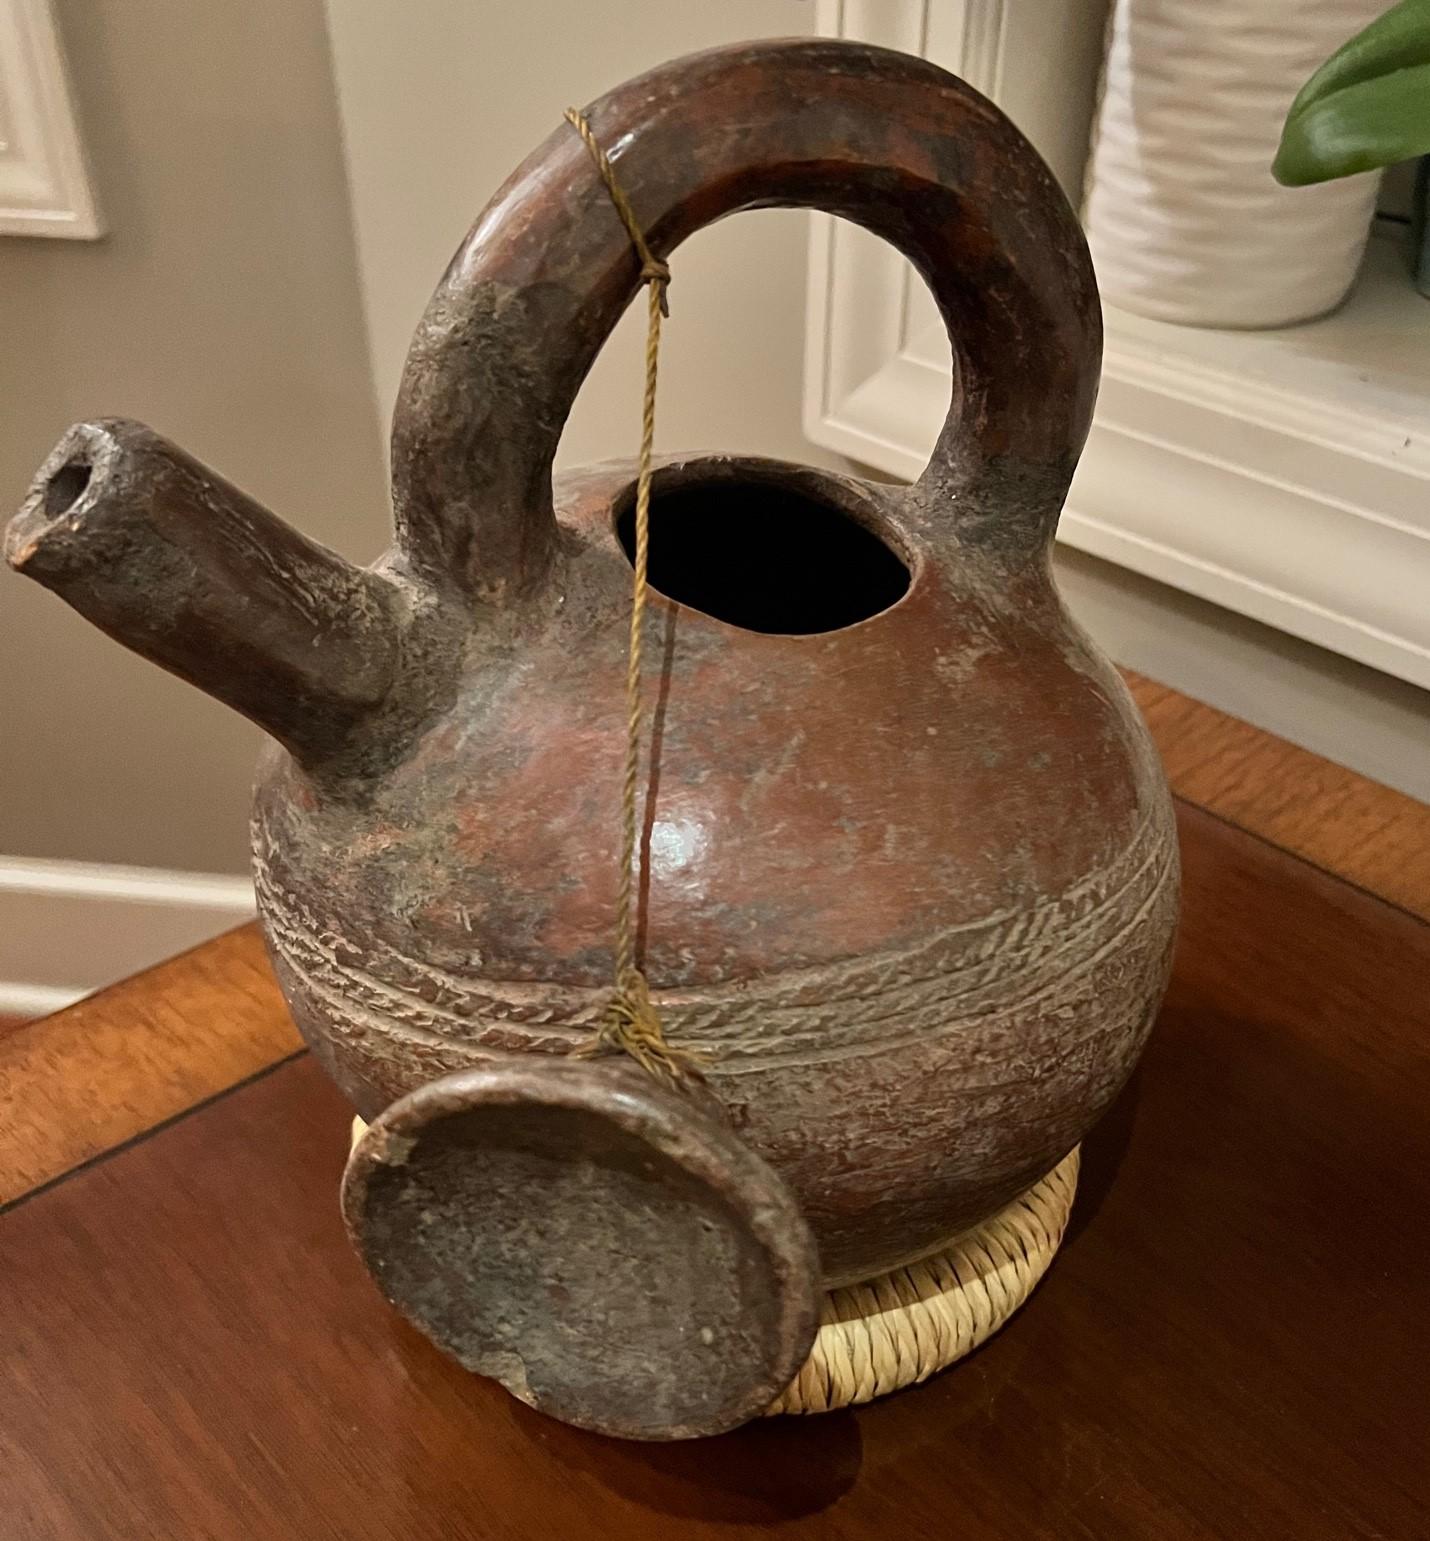 clay water jug with lid